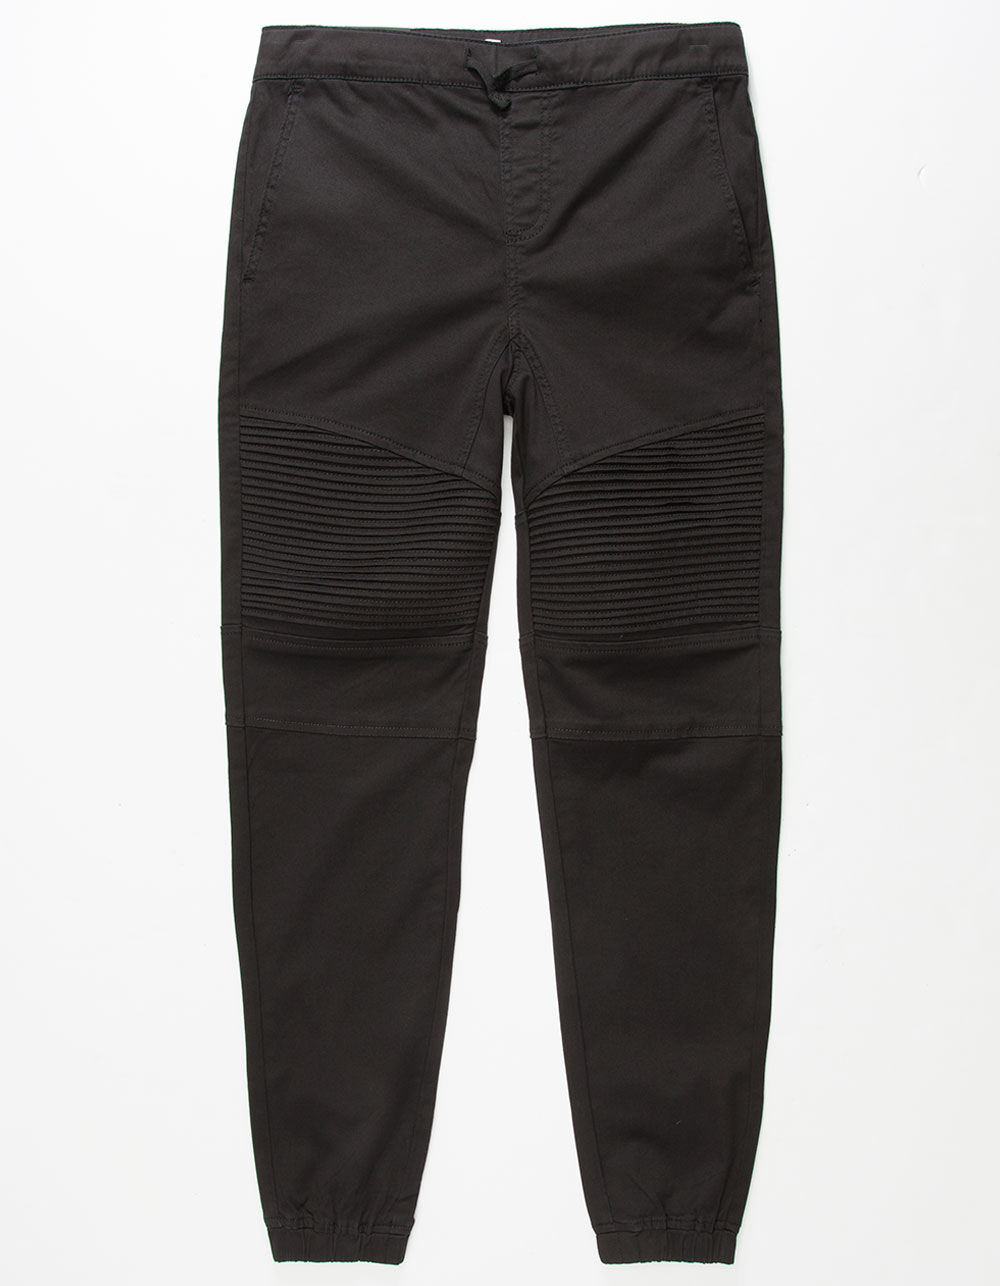 EAST POINTE Moto Boys Twill Jogger Pants image number 0